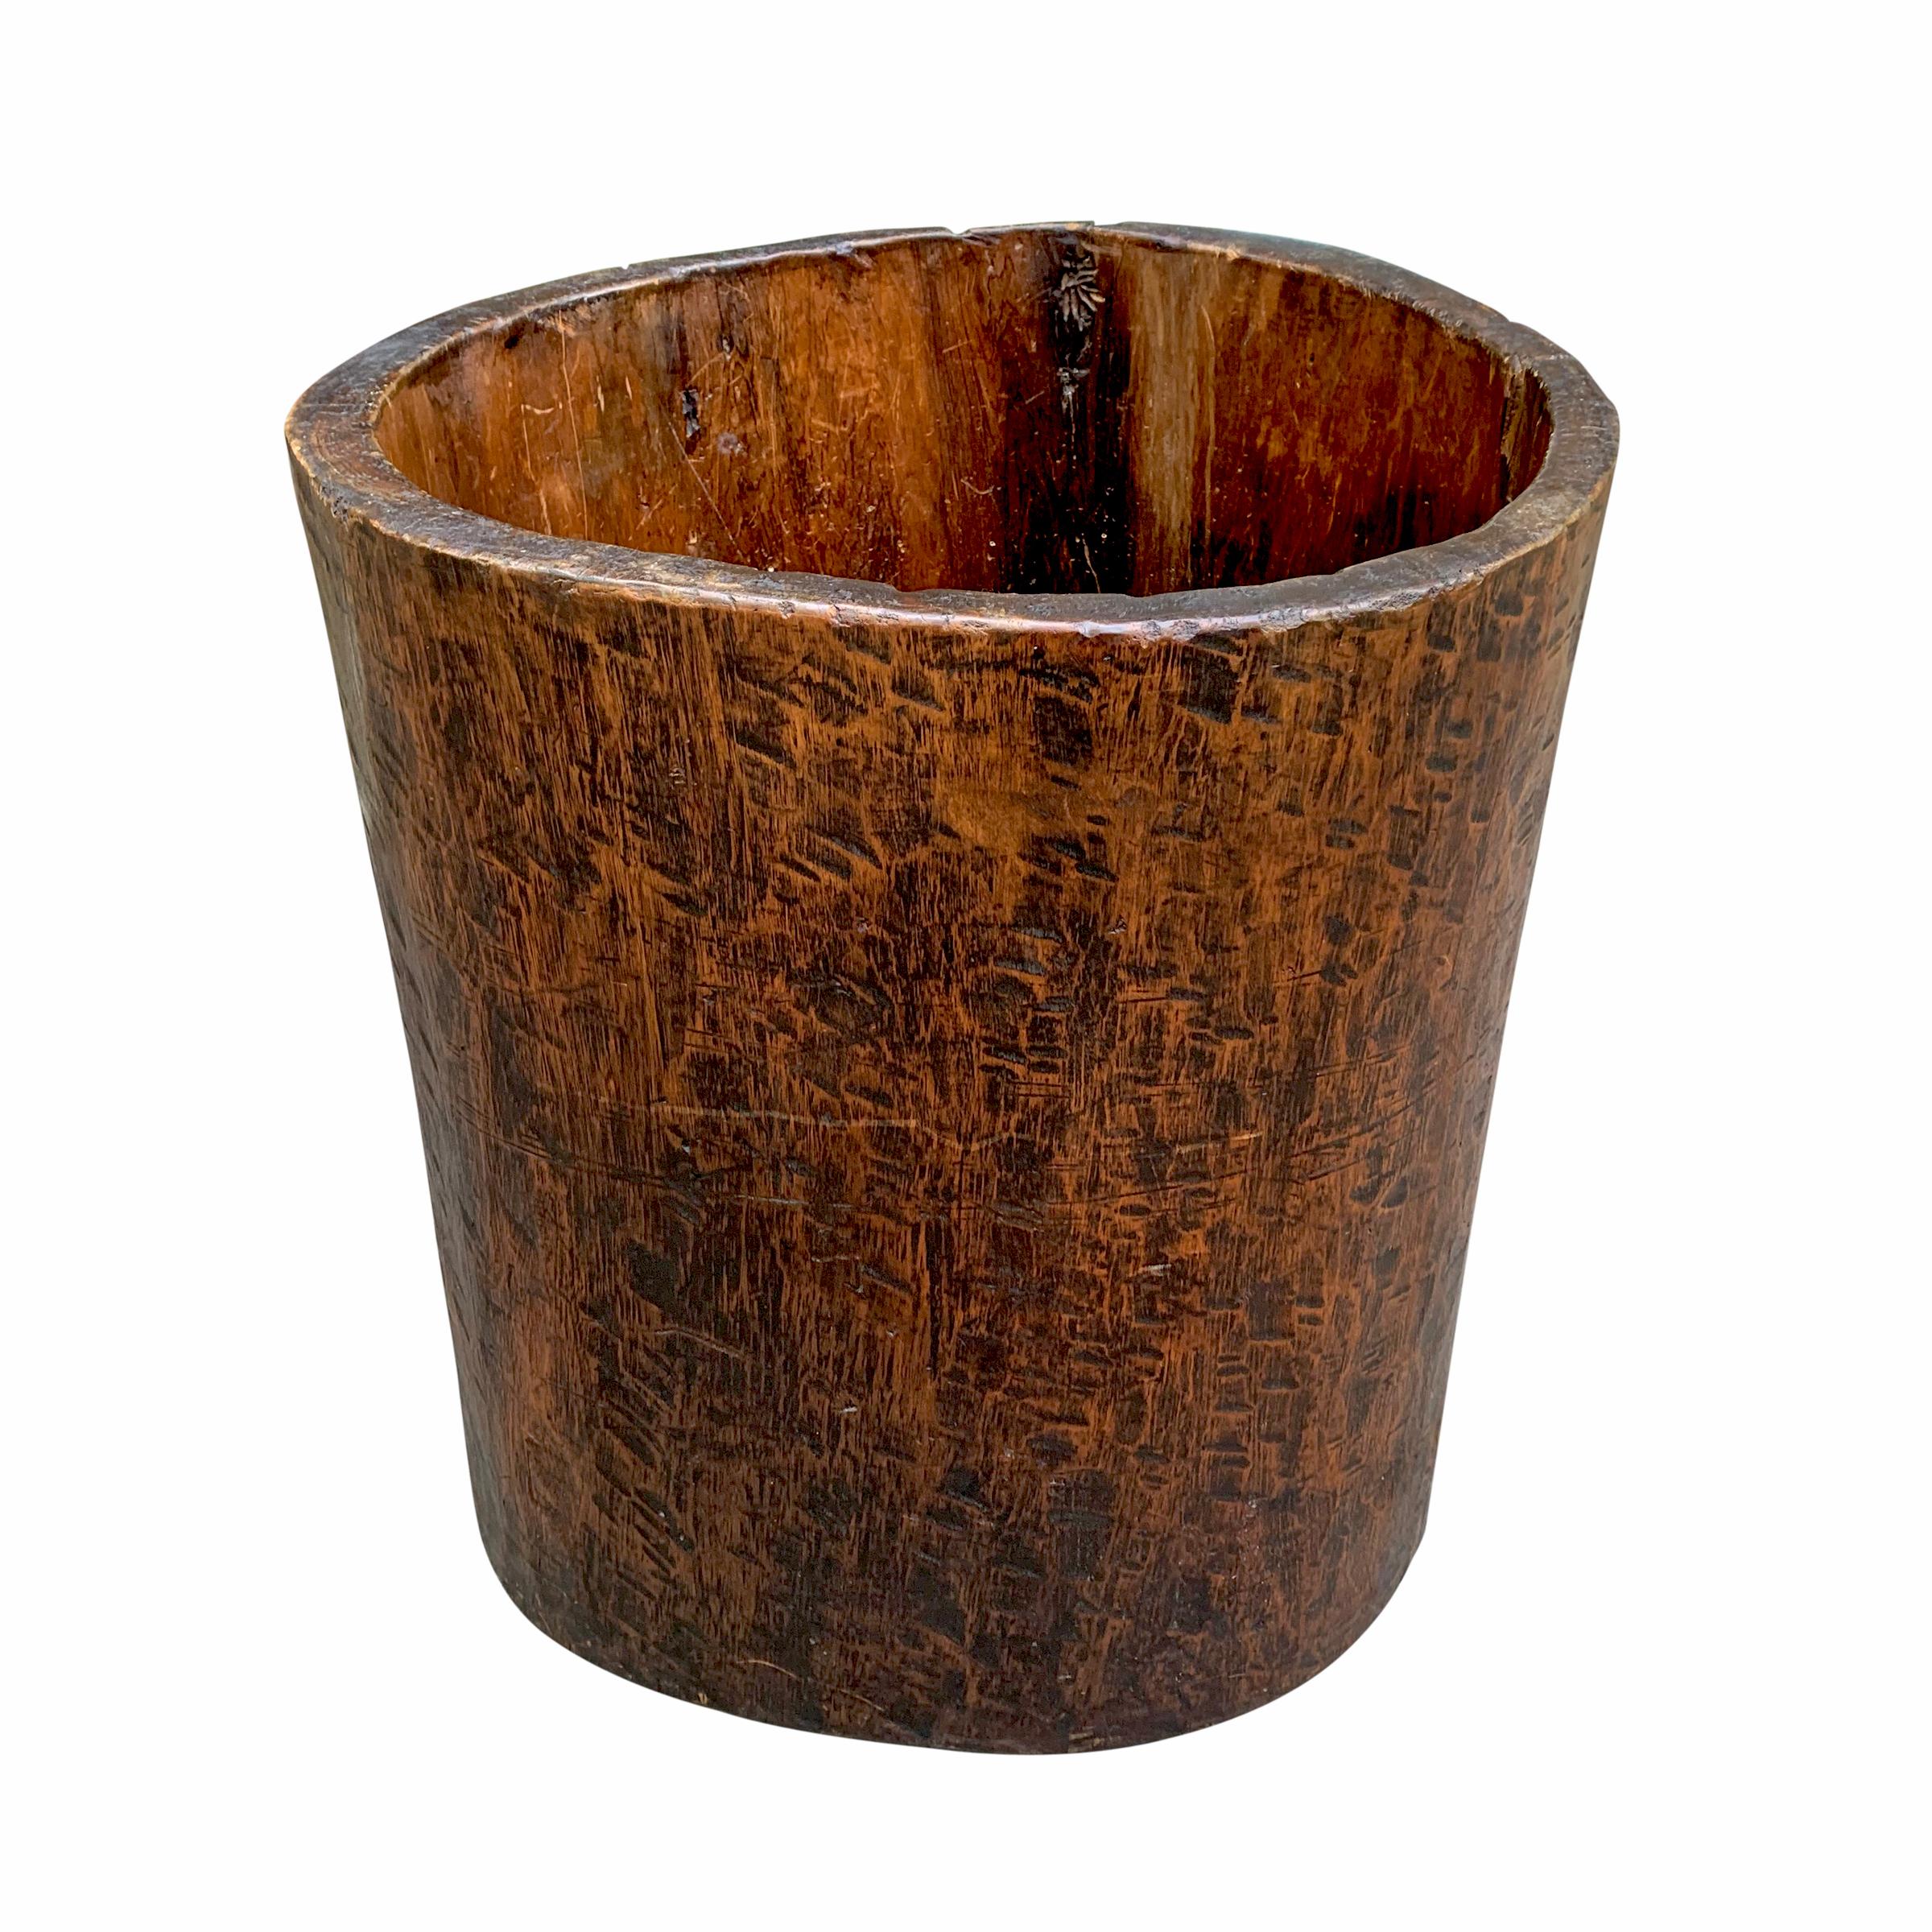 Rustic 19th Century Grain Barrel Carved from a Single Tree